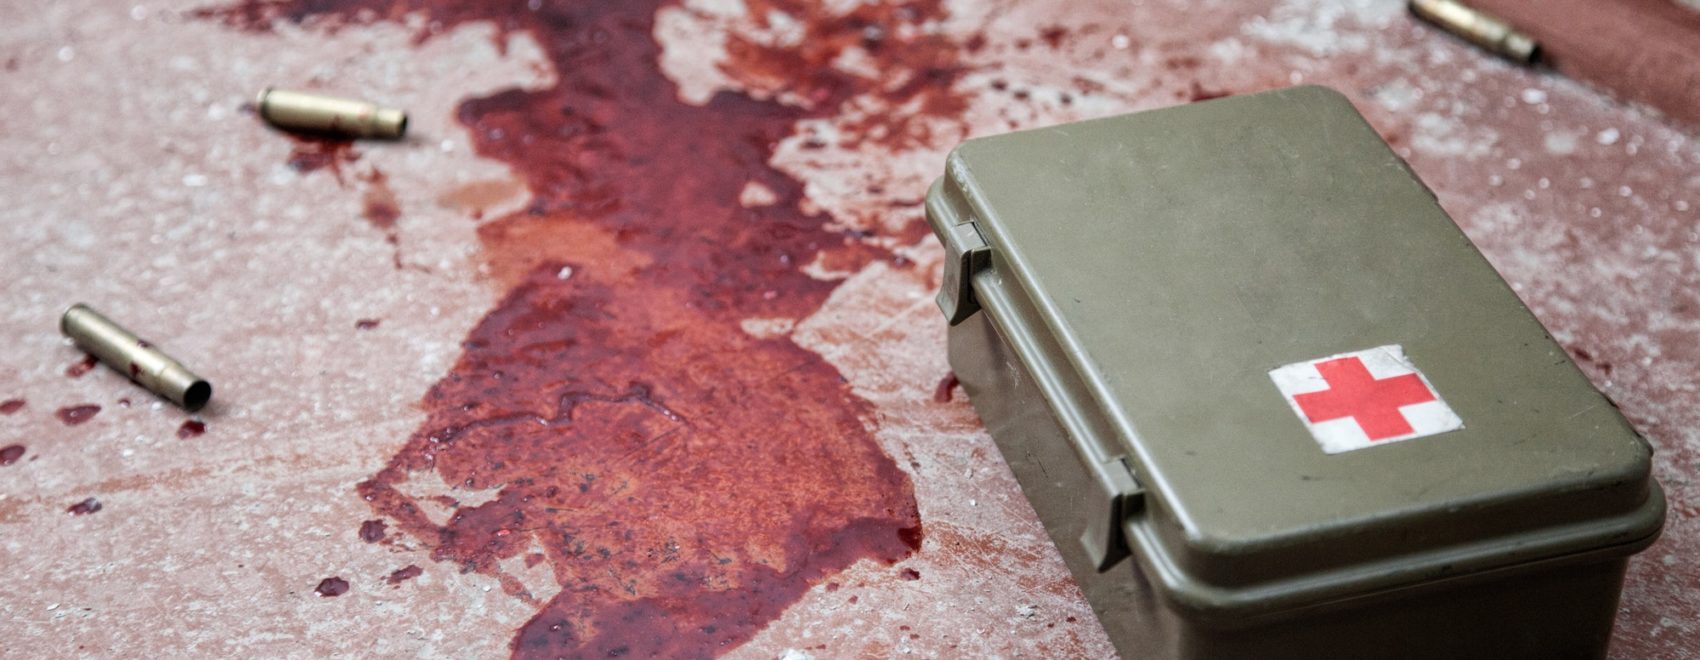 Military firs aid kit on floor with blood stains